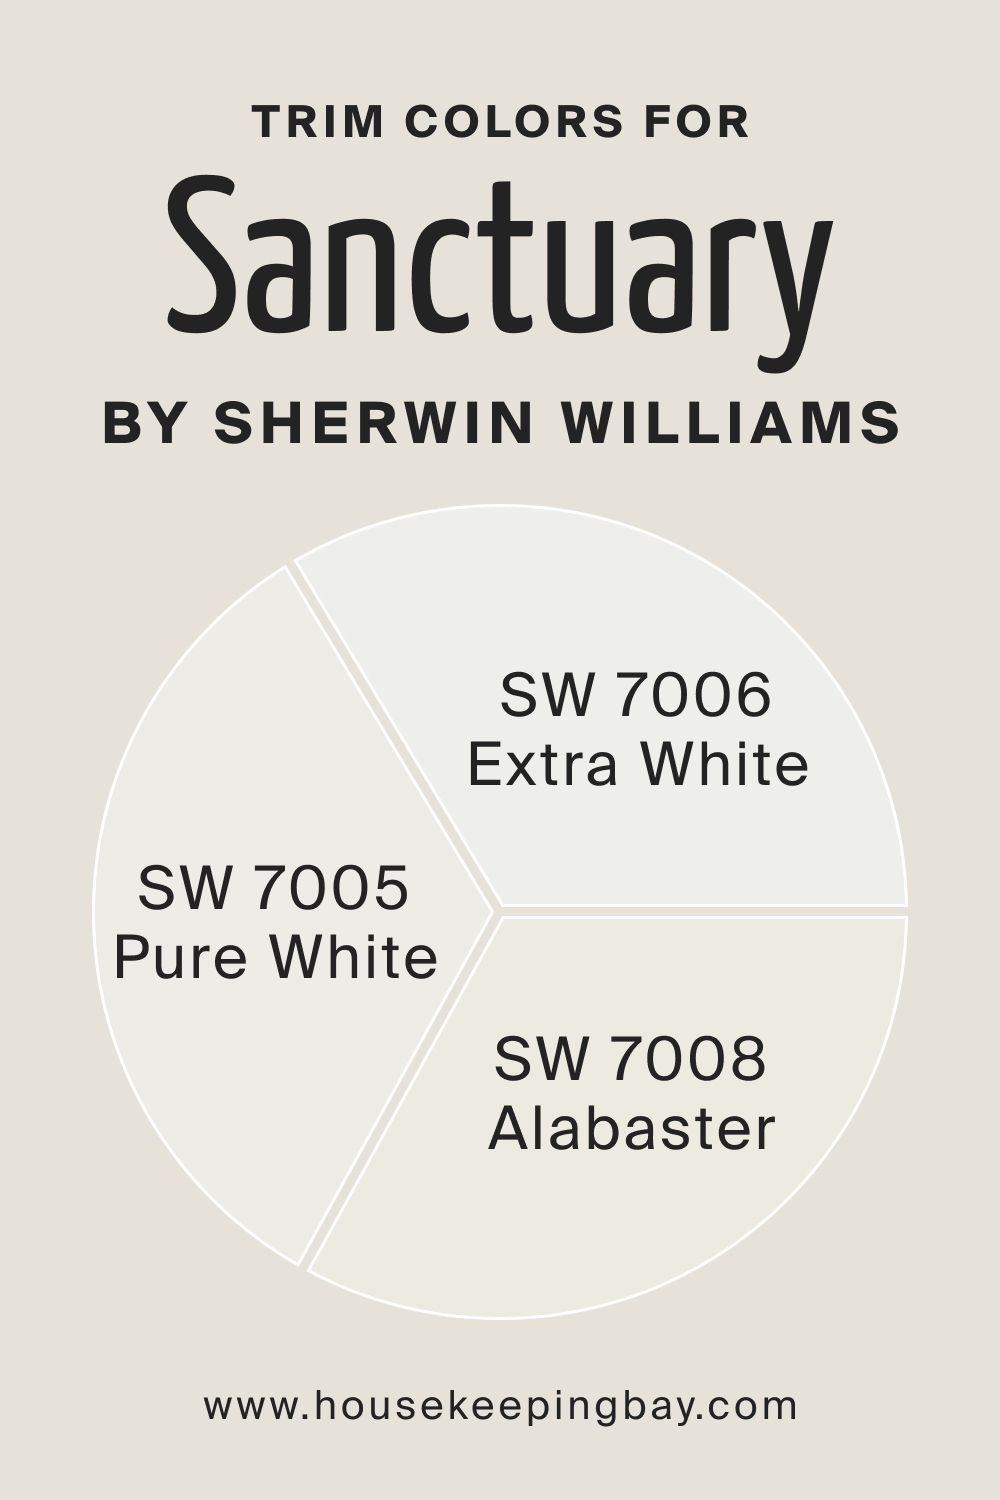 Trim Colors of SW 9583 Sanctuary by Sherwin Williams